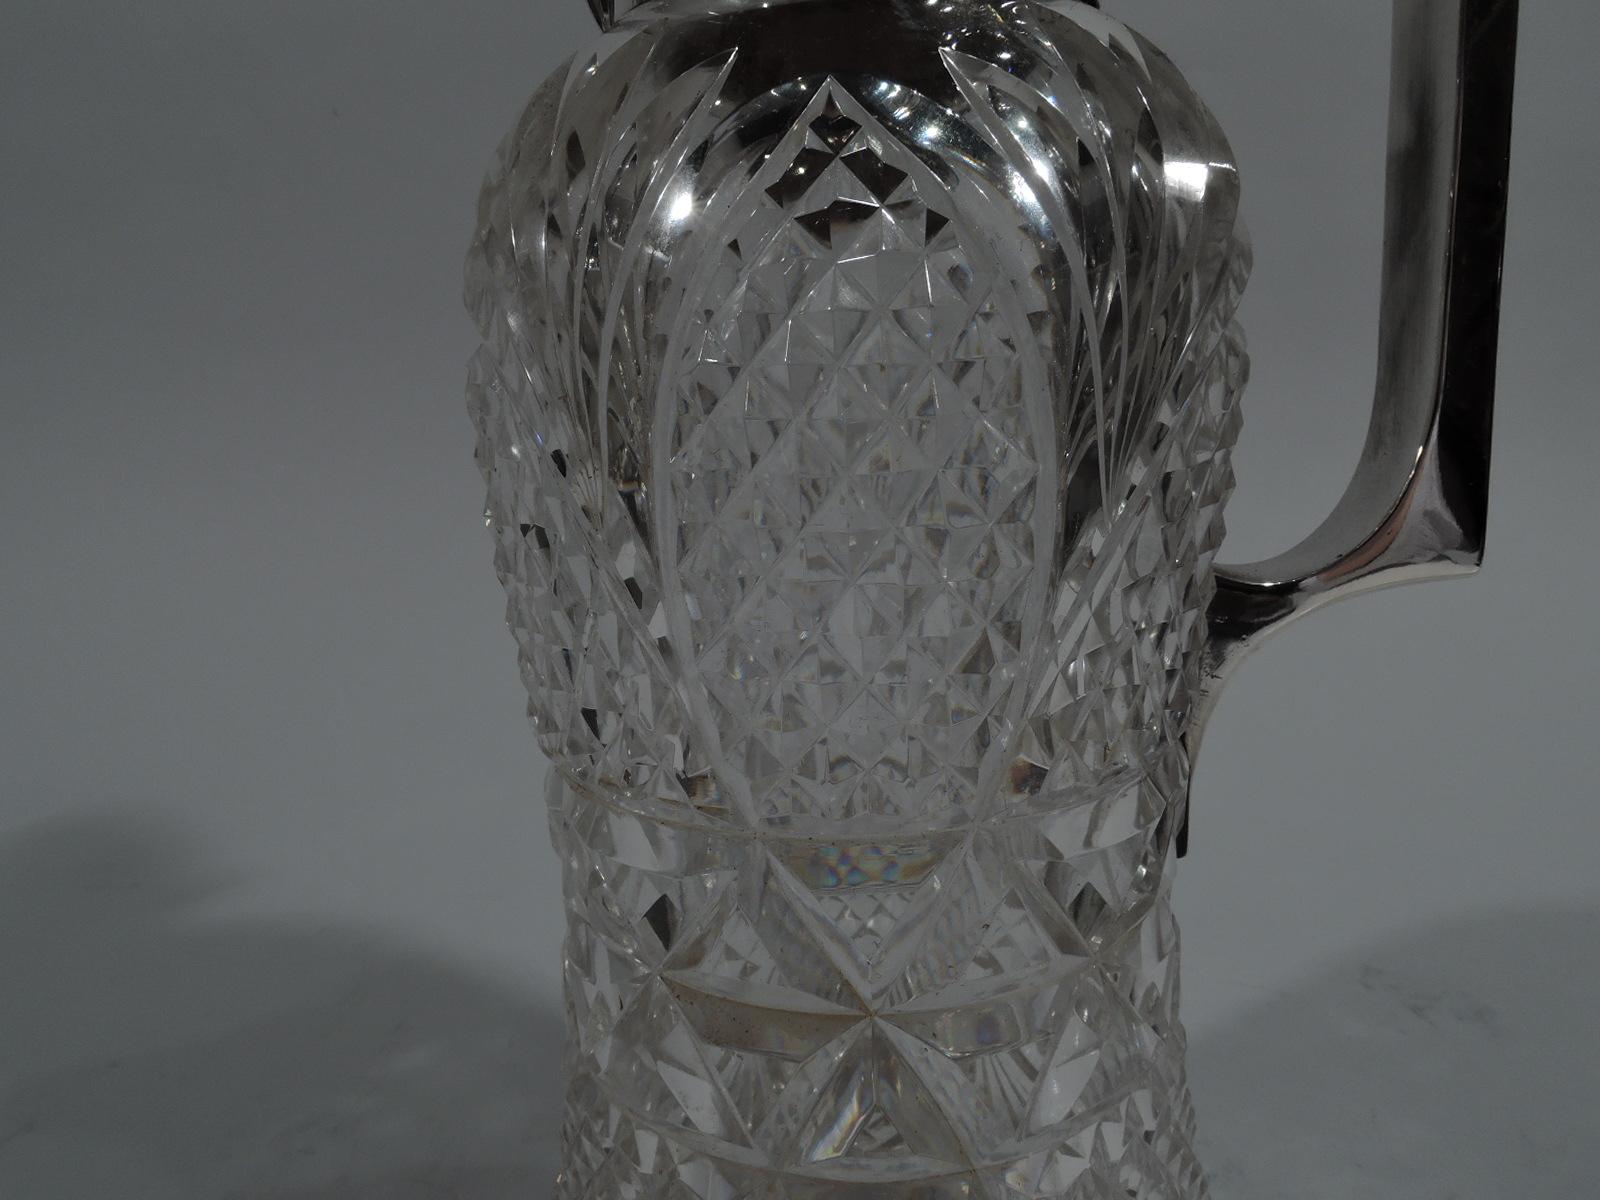 Antique English Edwardian Sterling Silver and Cut-Glass Decanter 1